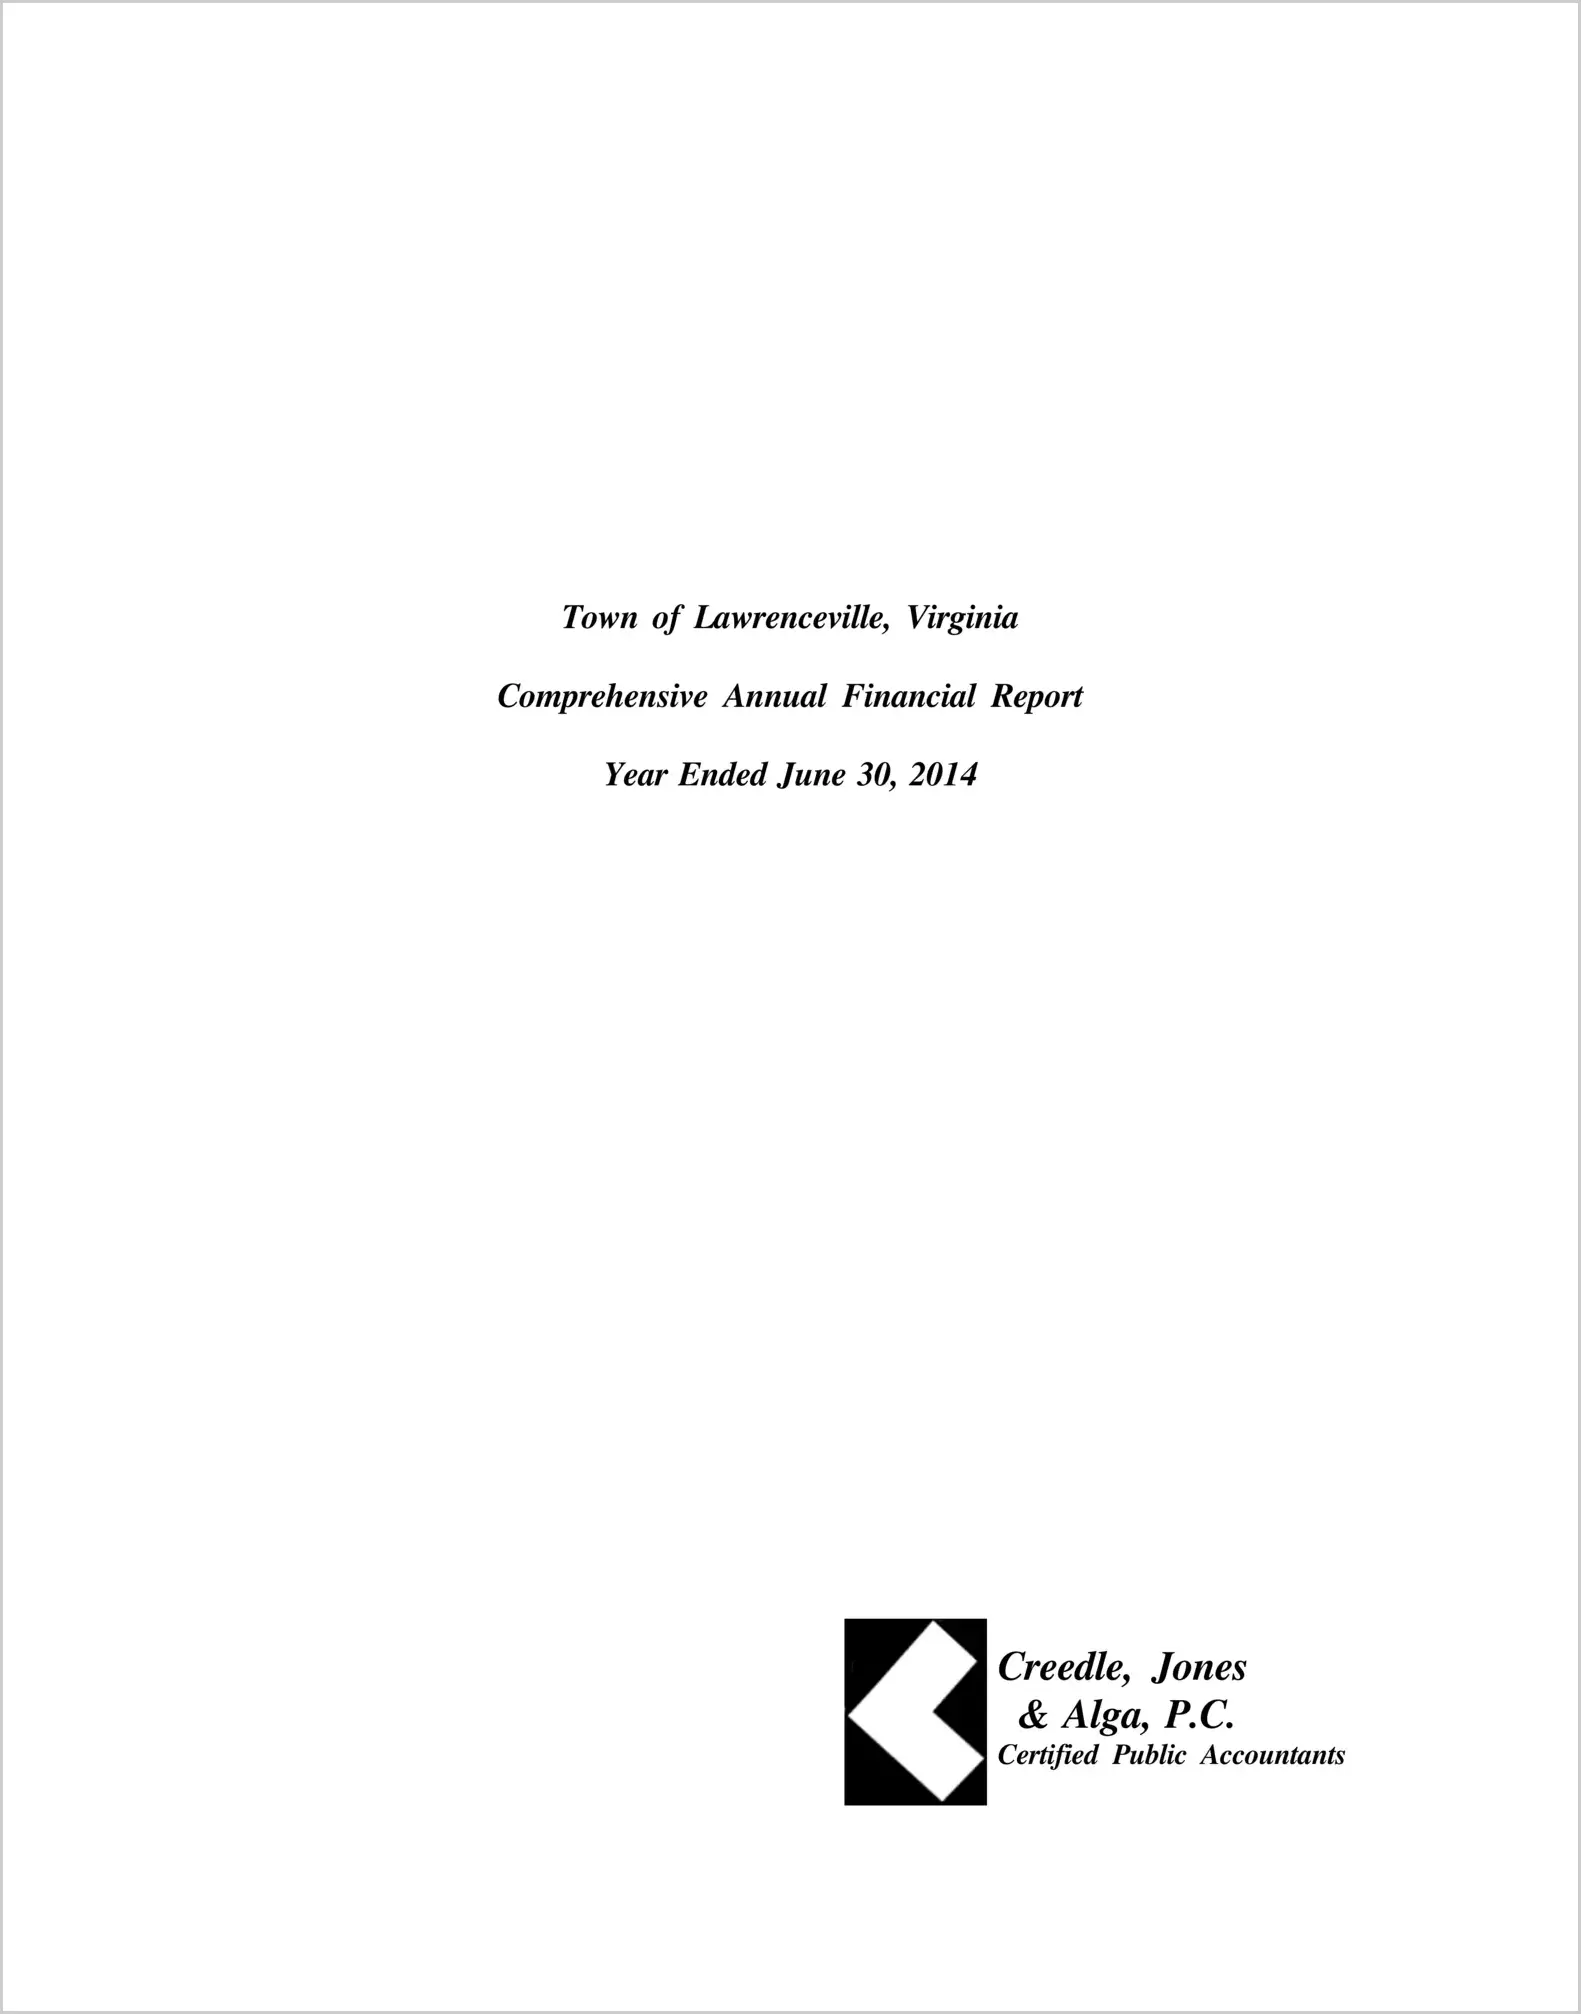 2014 Annual Financial Report for Town of Lawrenceville